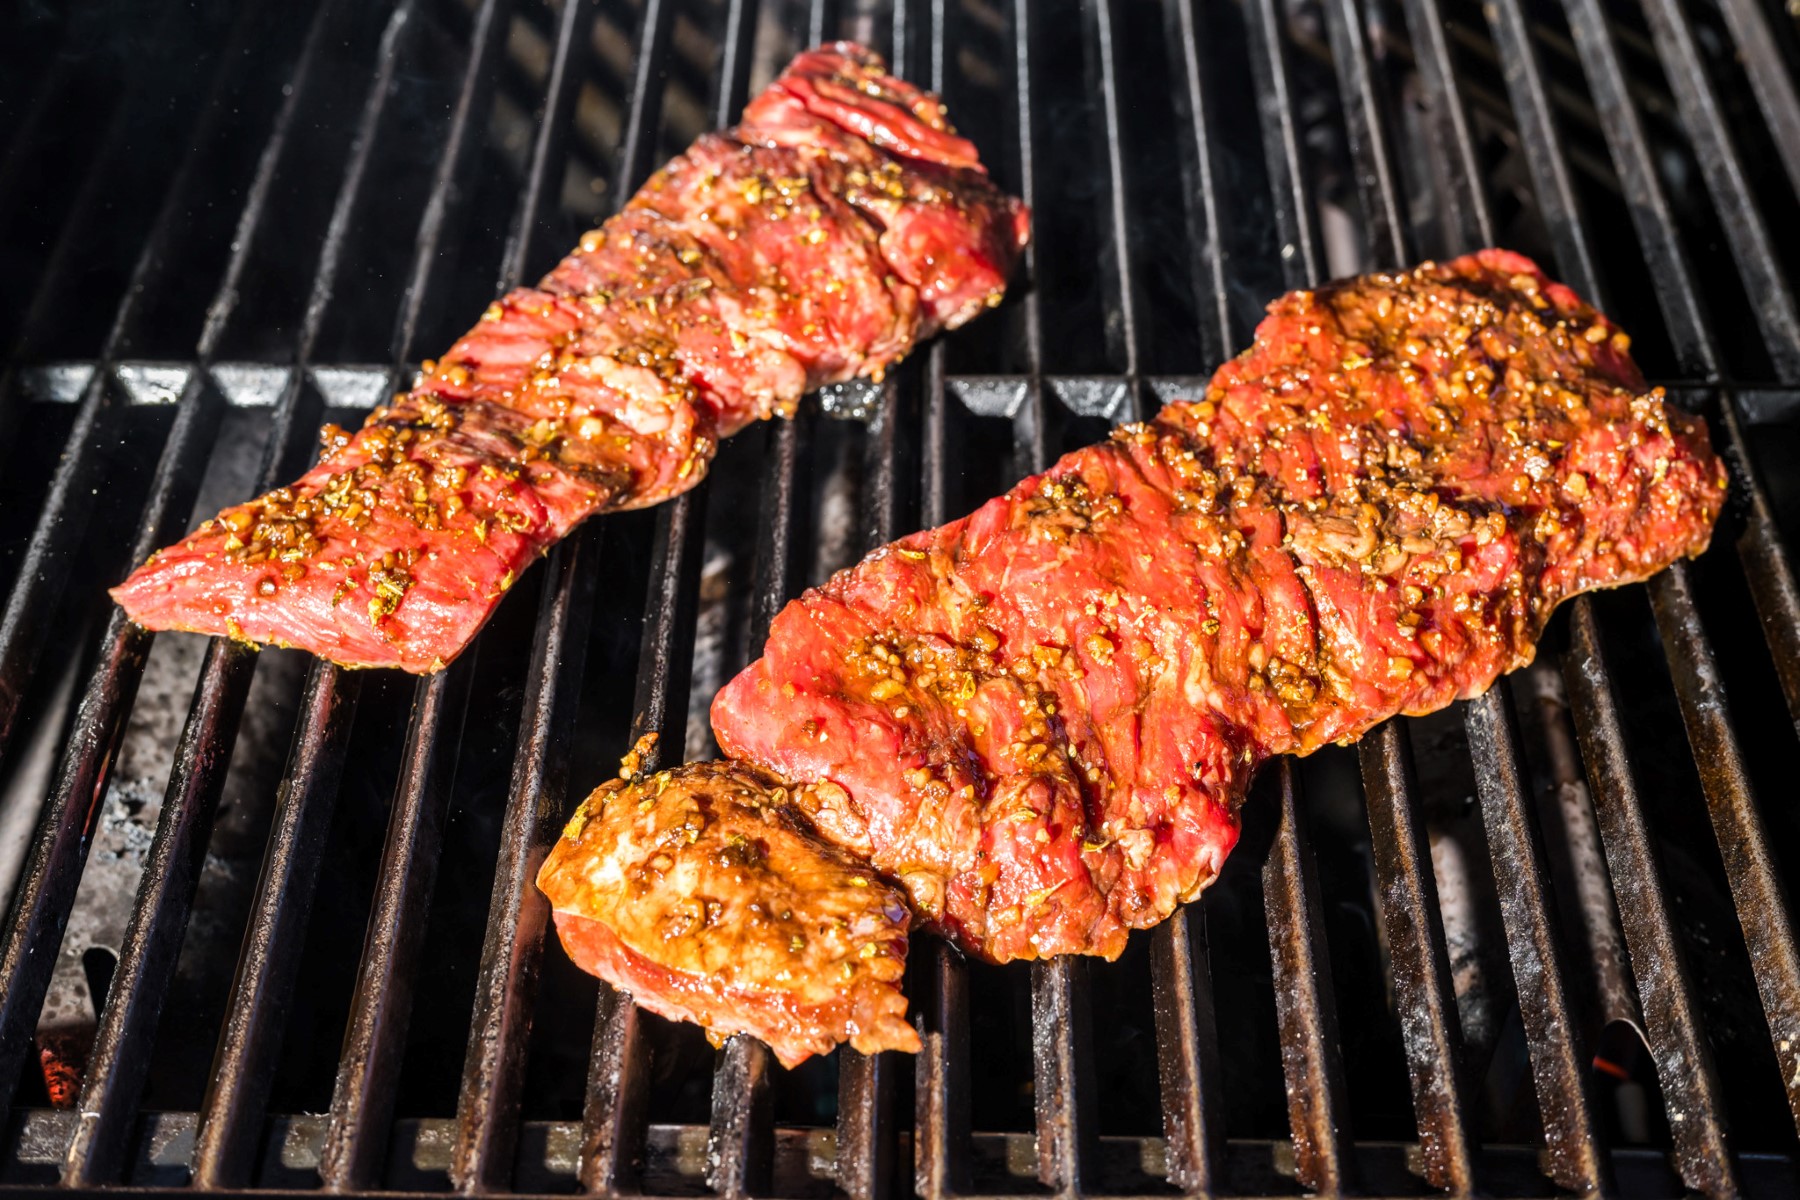 Marinated Flank steak placed on the grill to cook.